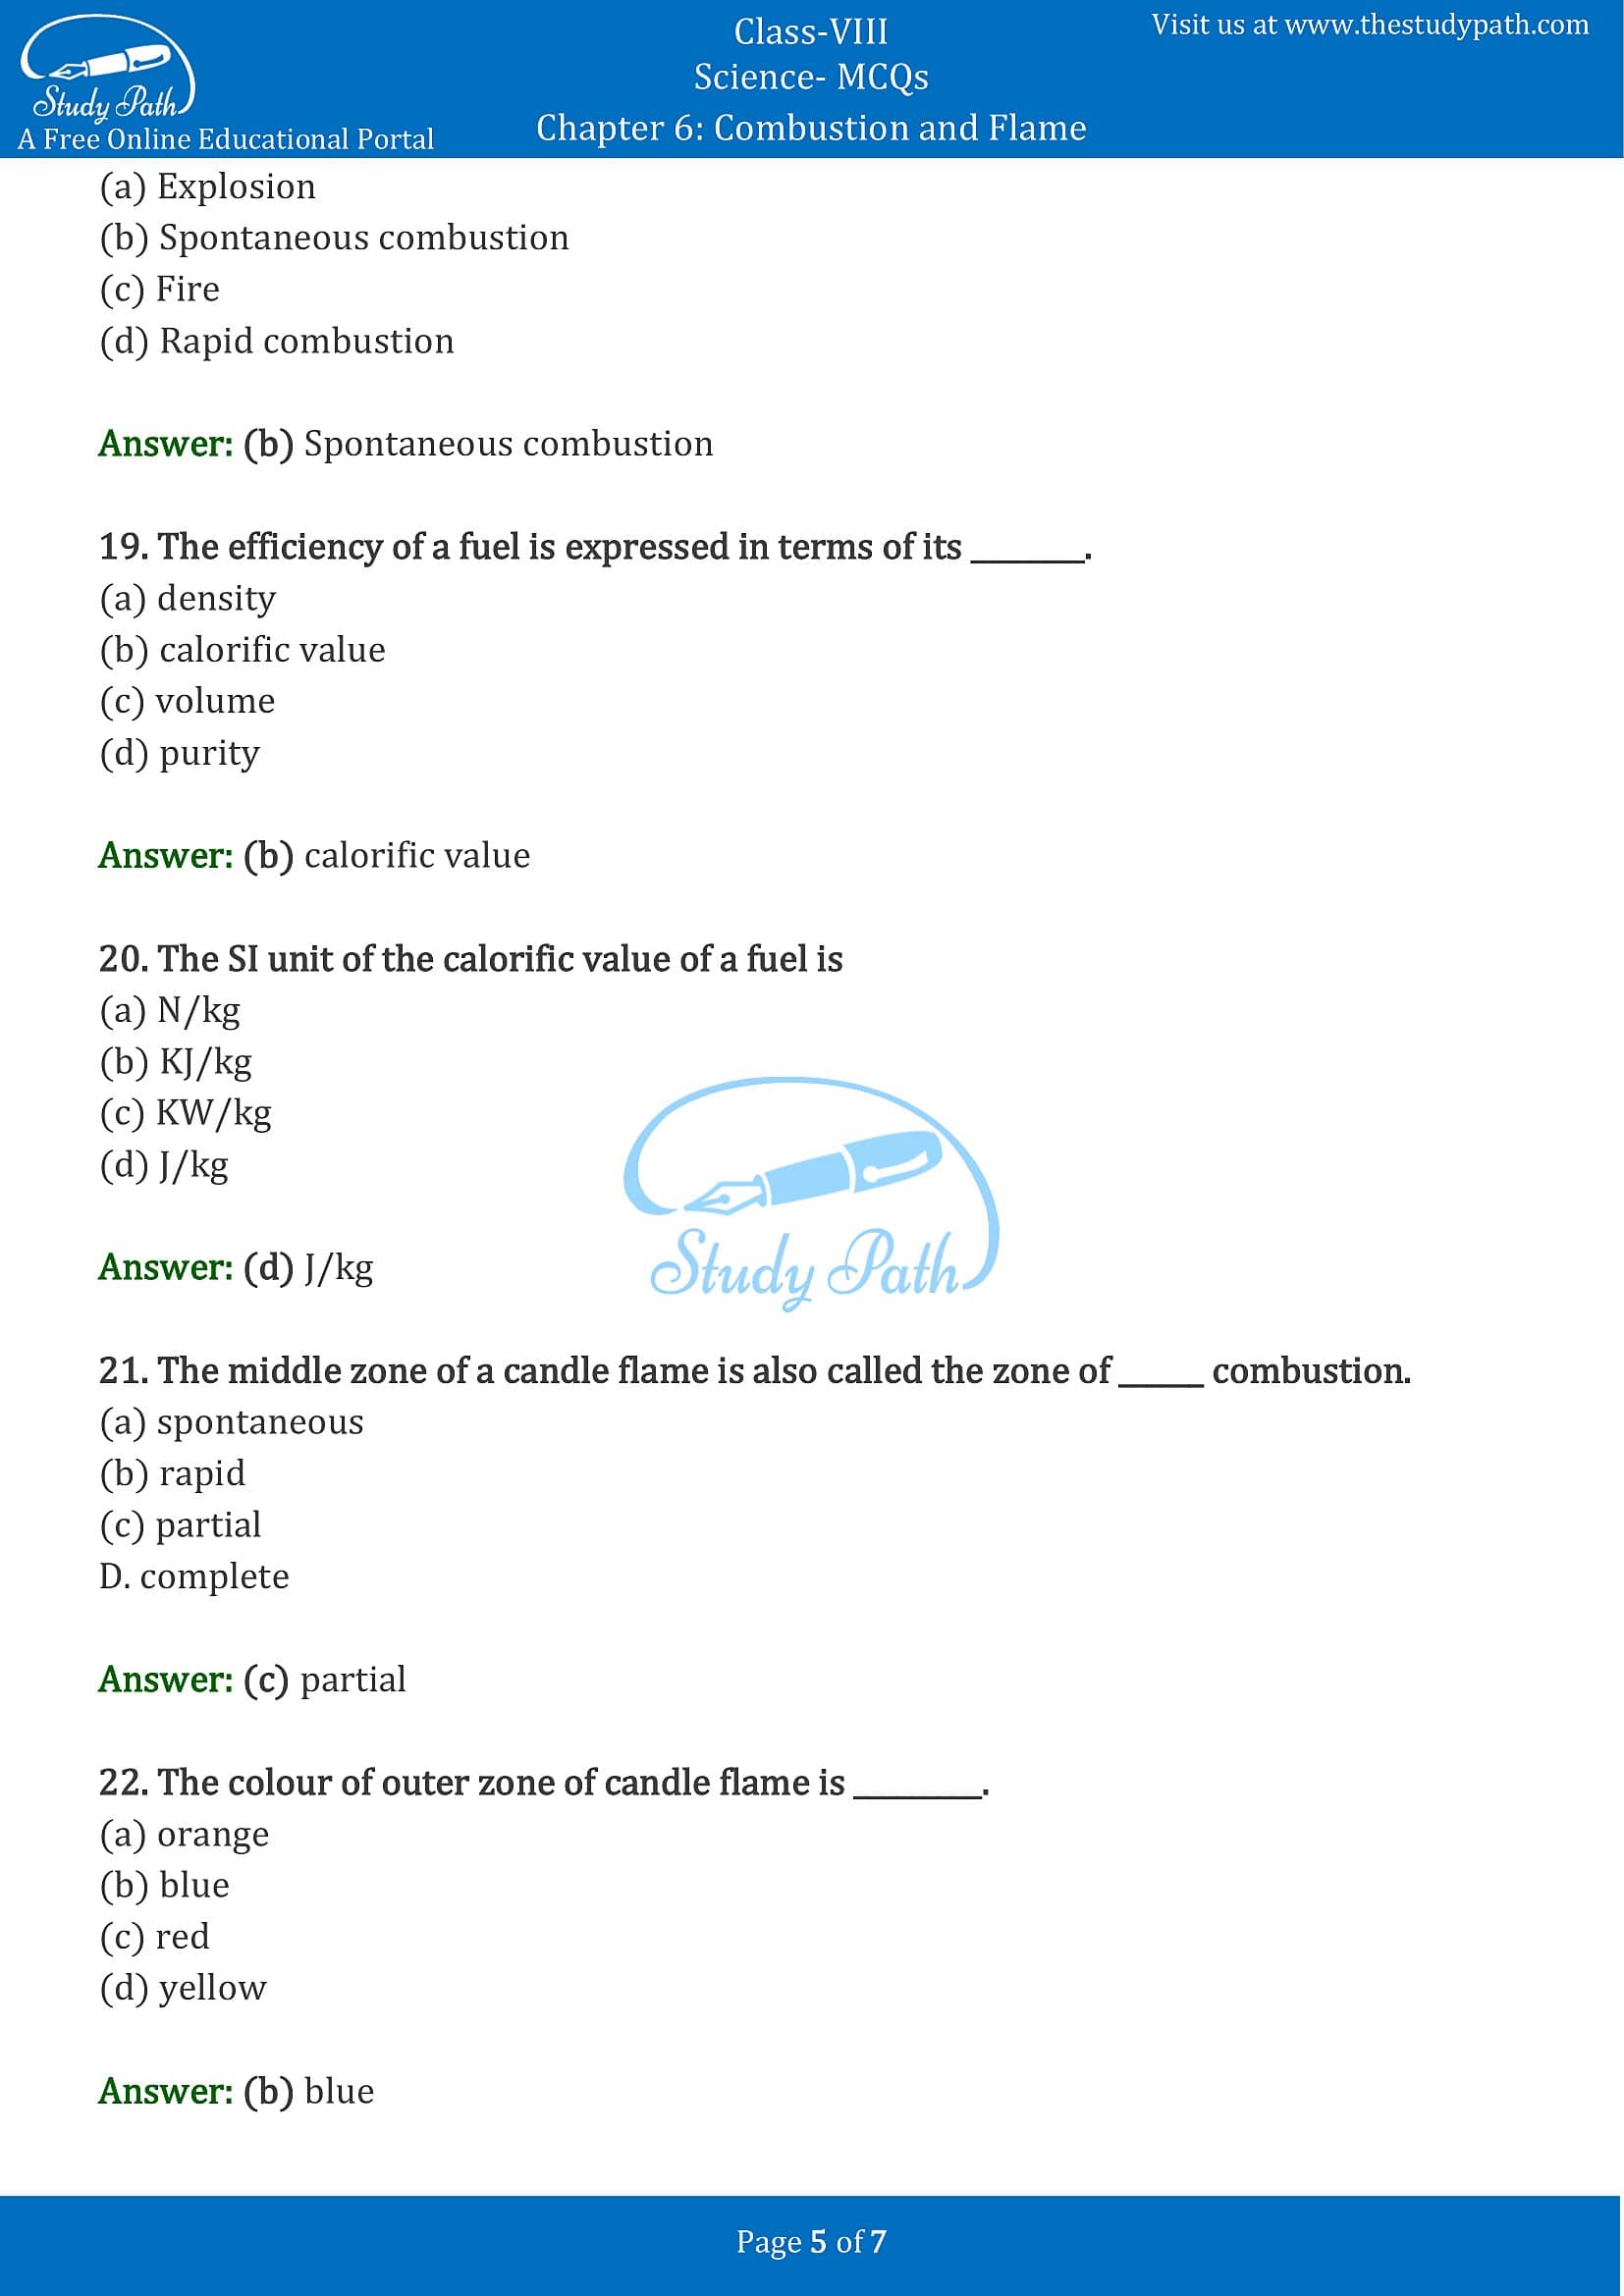 MCQ Questions for Class 8 Science Chapter 6 Combustion and Flame with Answers PDF -5